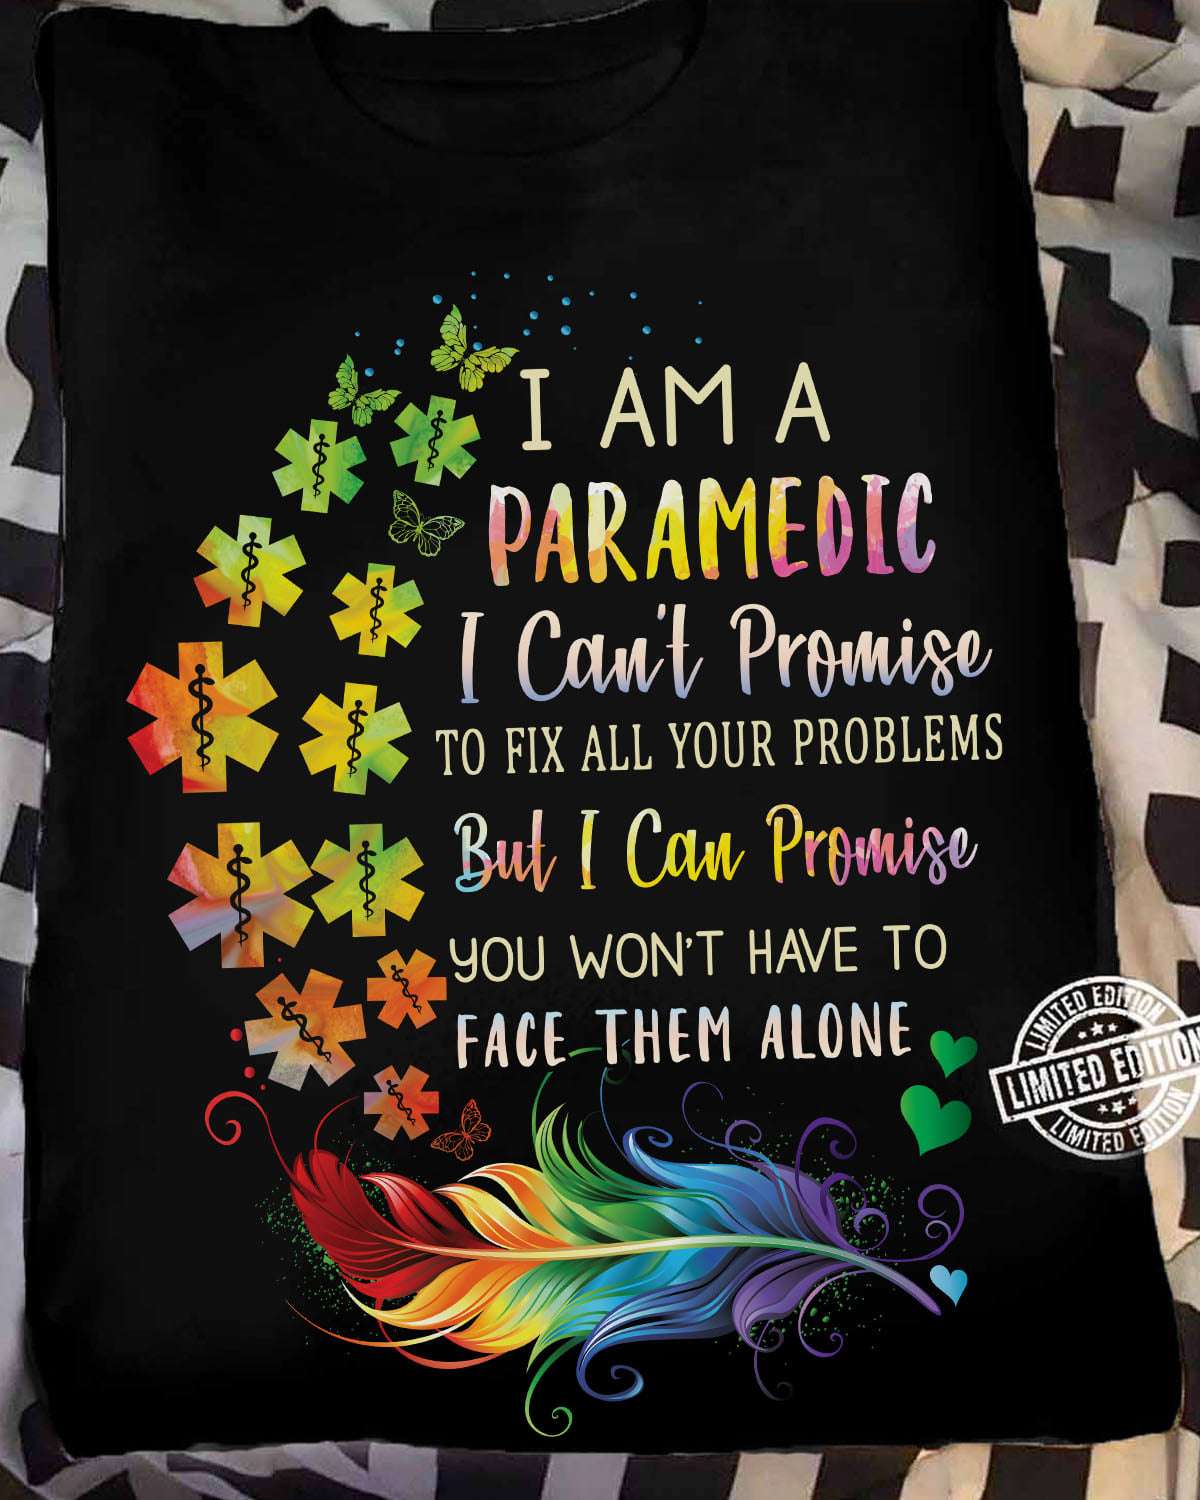 I am a paramedic i can't promise to fix all your problems but i can promise you won't have to face them alone